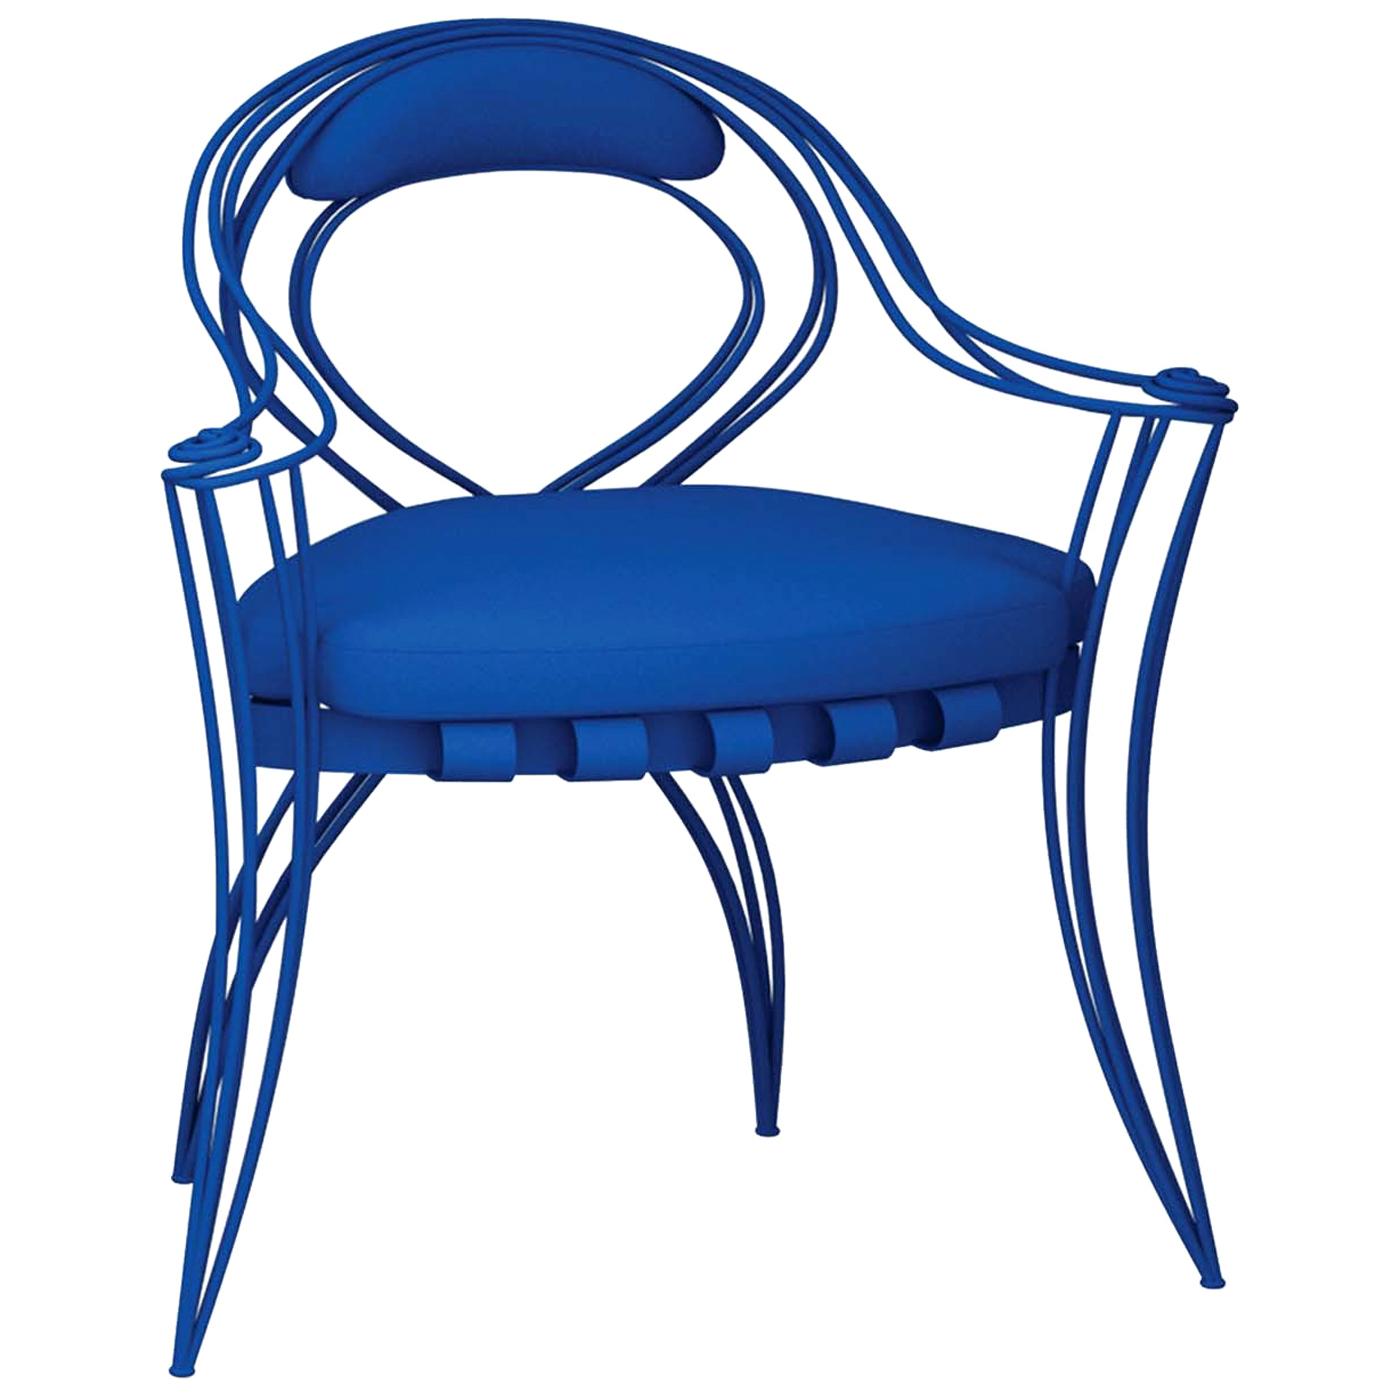 Opus Garden Blue Chair with Armrests by Carlo Rampazzi